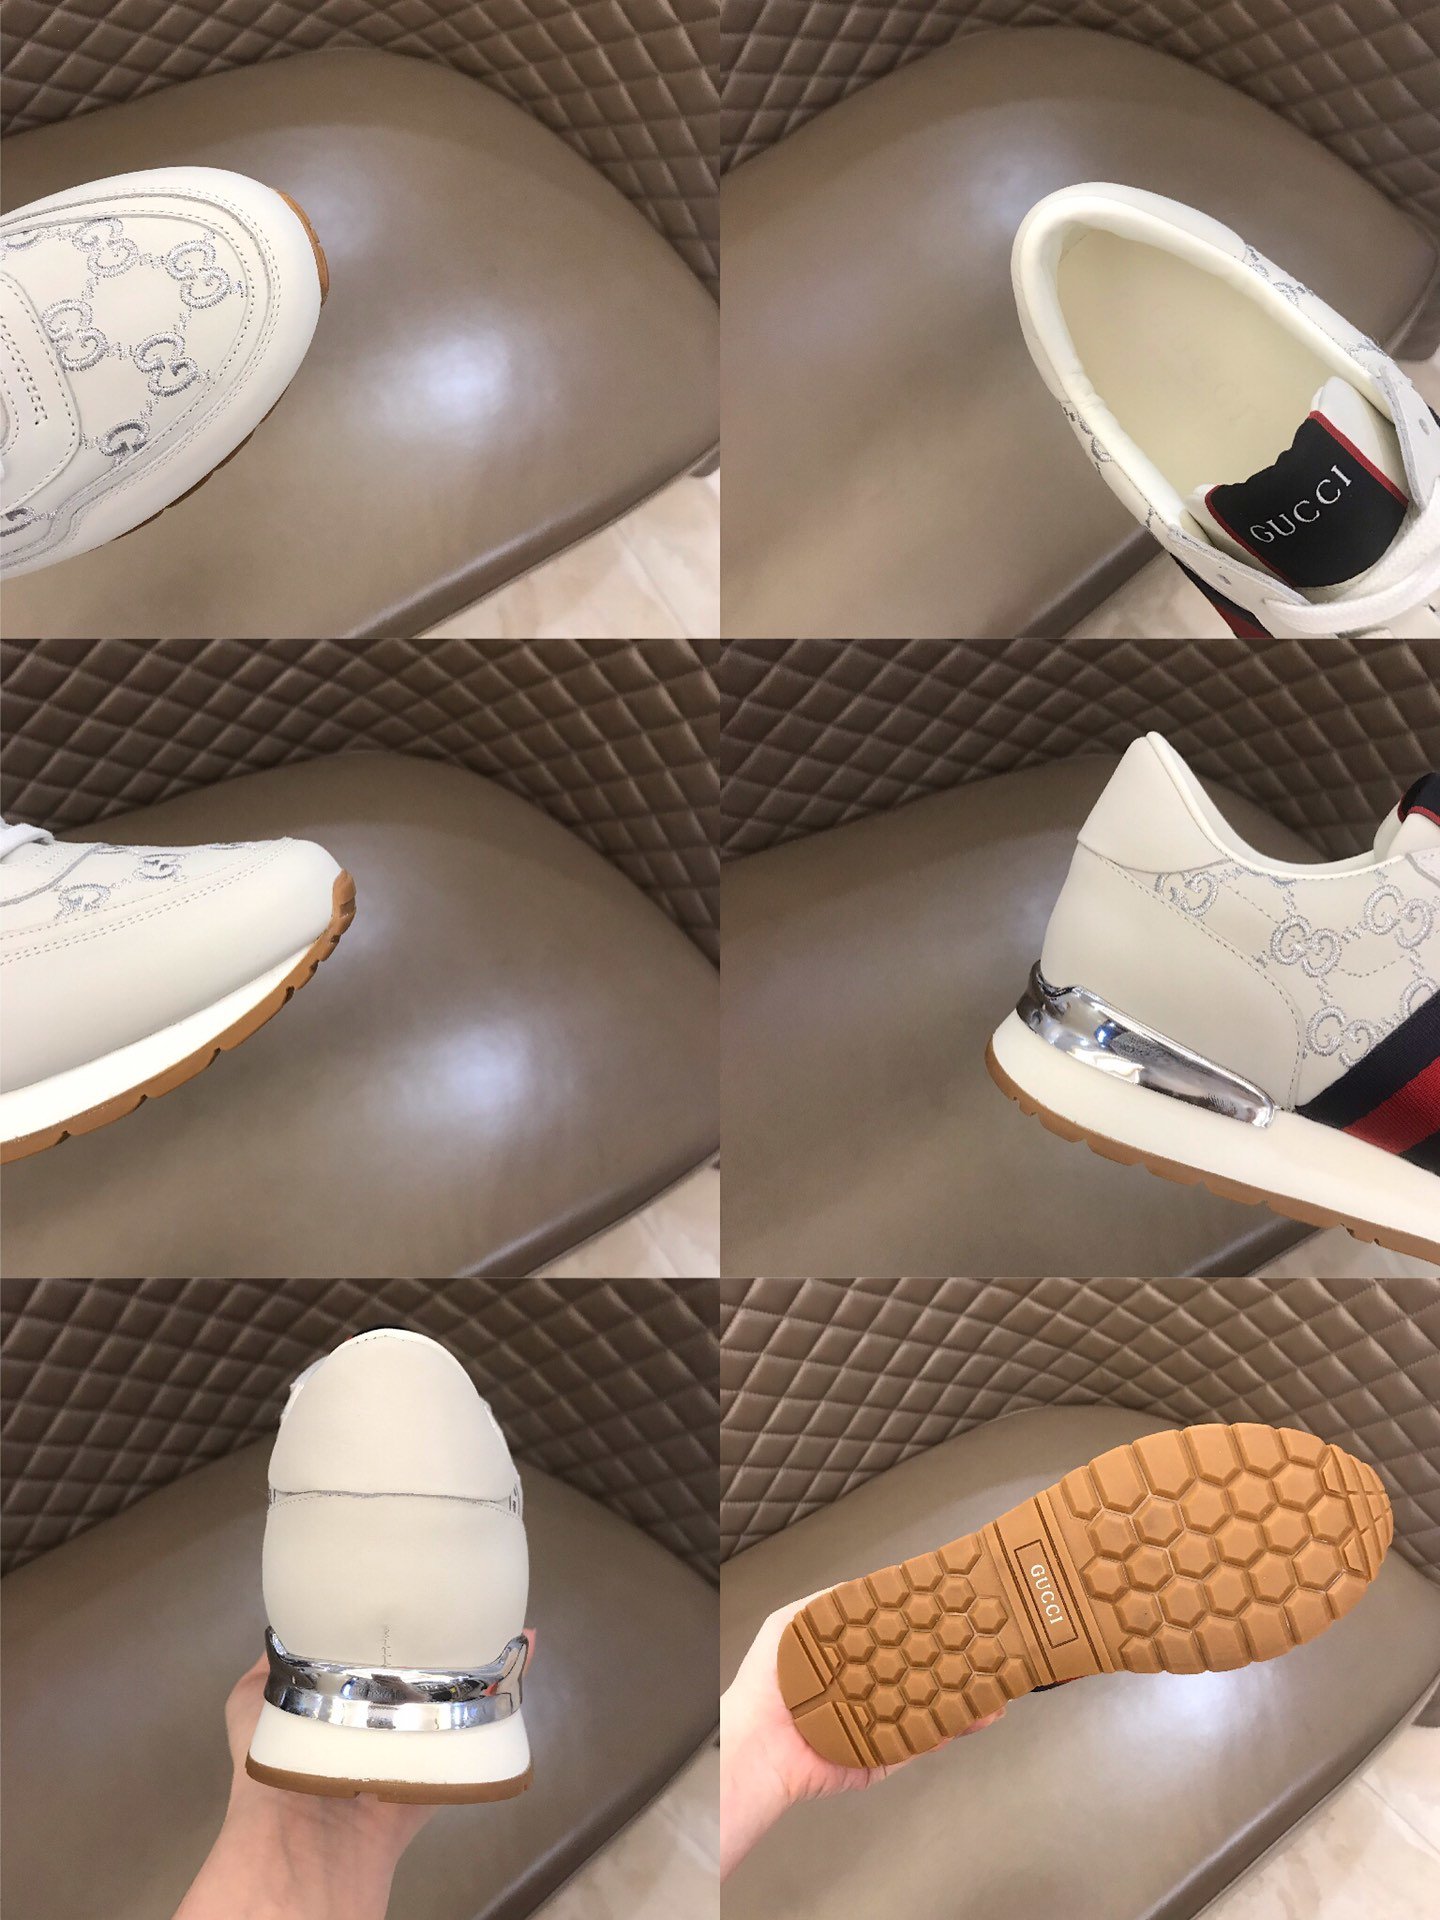 Gucci High Quality Sneakers White suede and silver GG embroidery and silver details MS021081